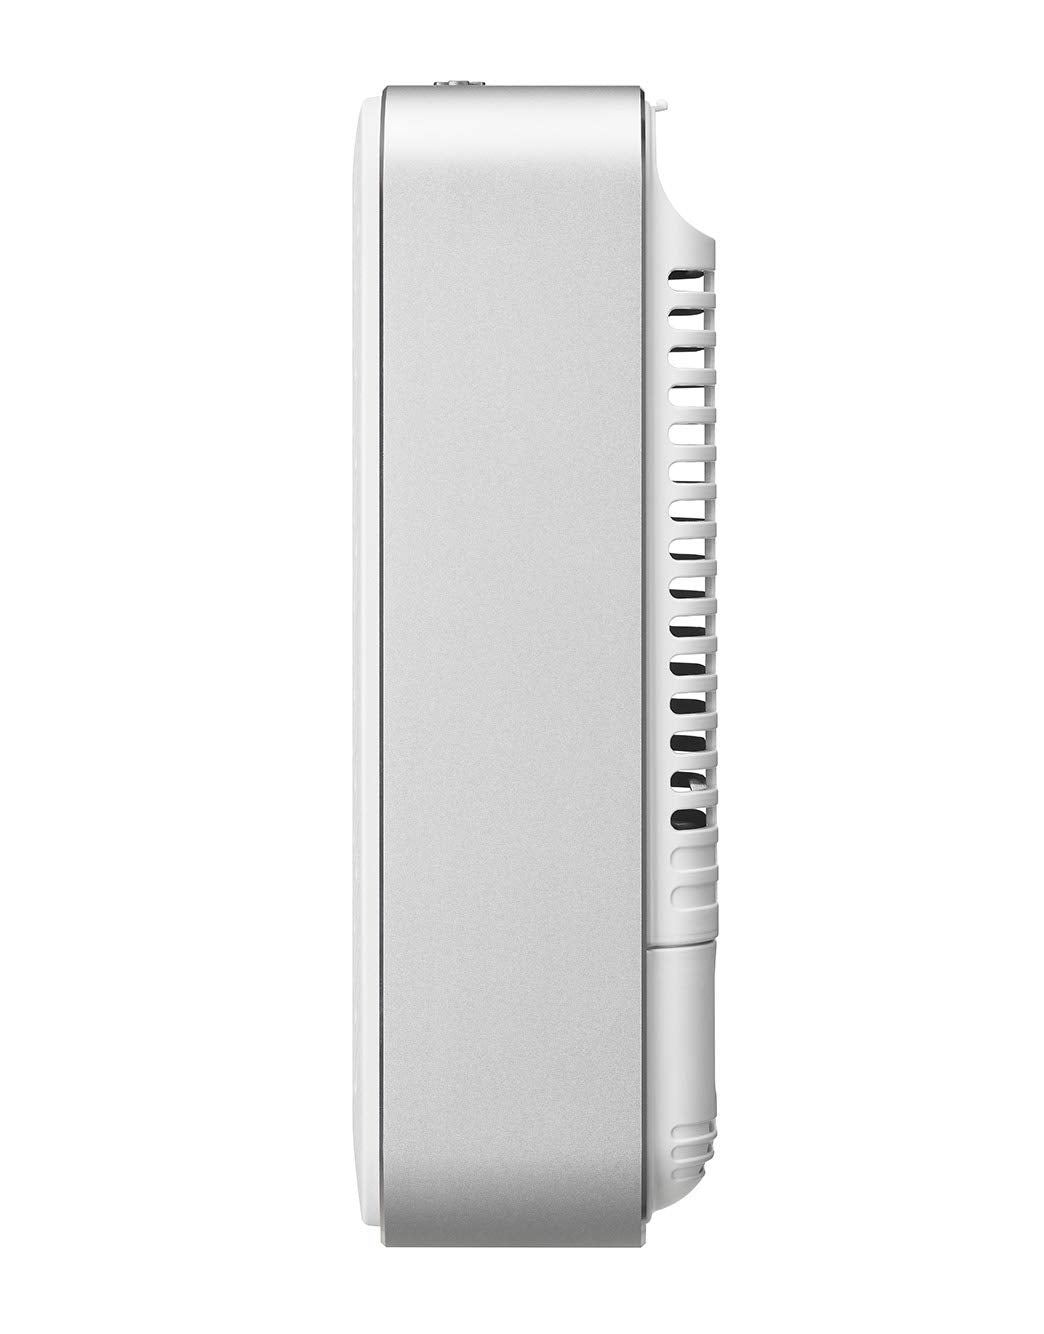 LG PuriCare Mini – Small Lightweight Ultra Quiet Portable Air Purifier for Eliminating ultra-fine dust and small particles in the Home Bedroom Office Airplane Train Car or On the Go, White (AP151MWA1)